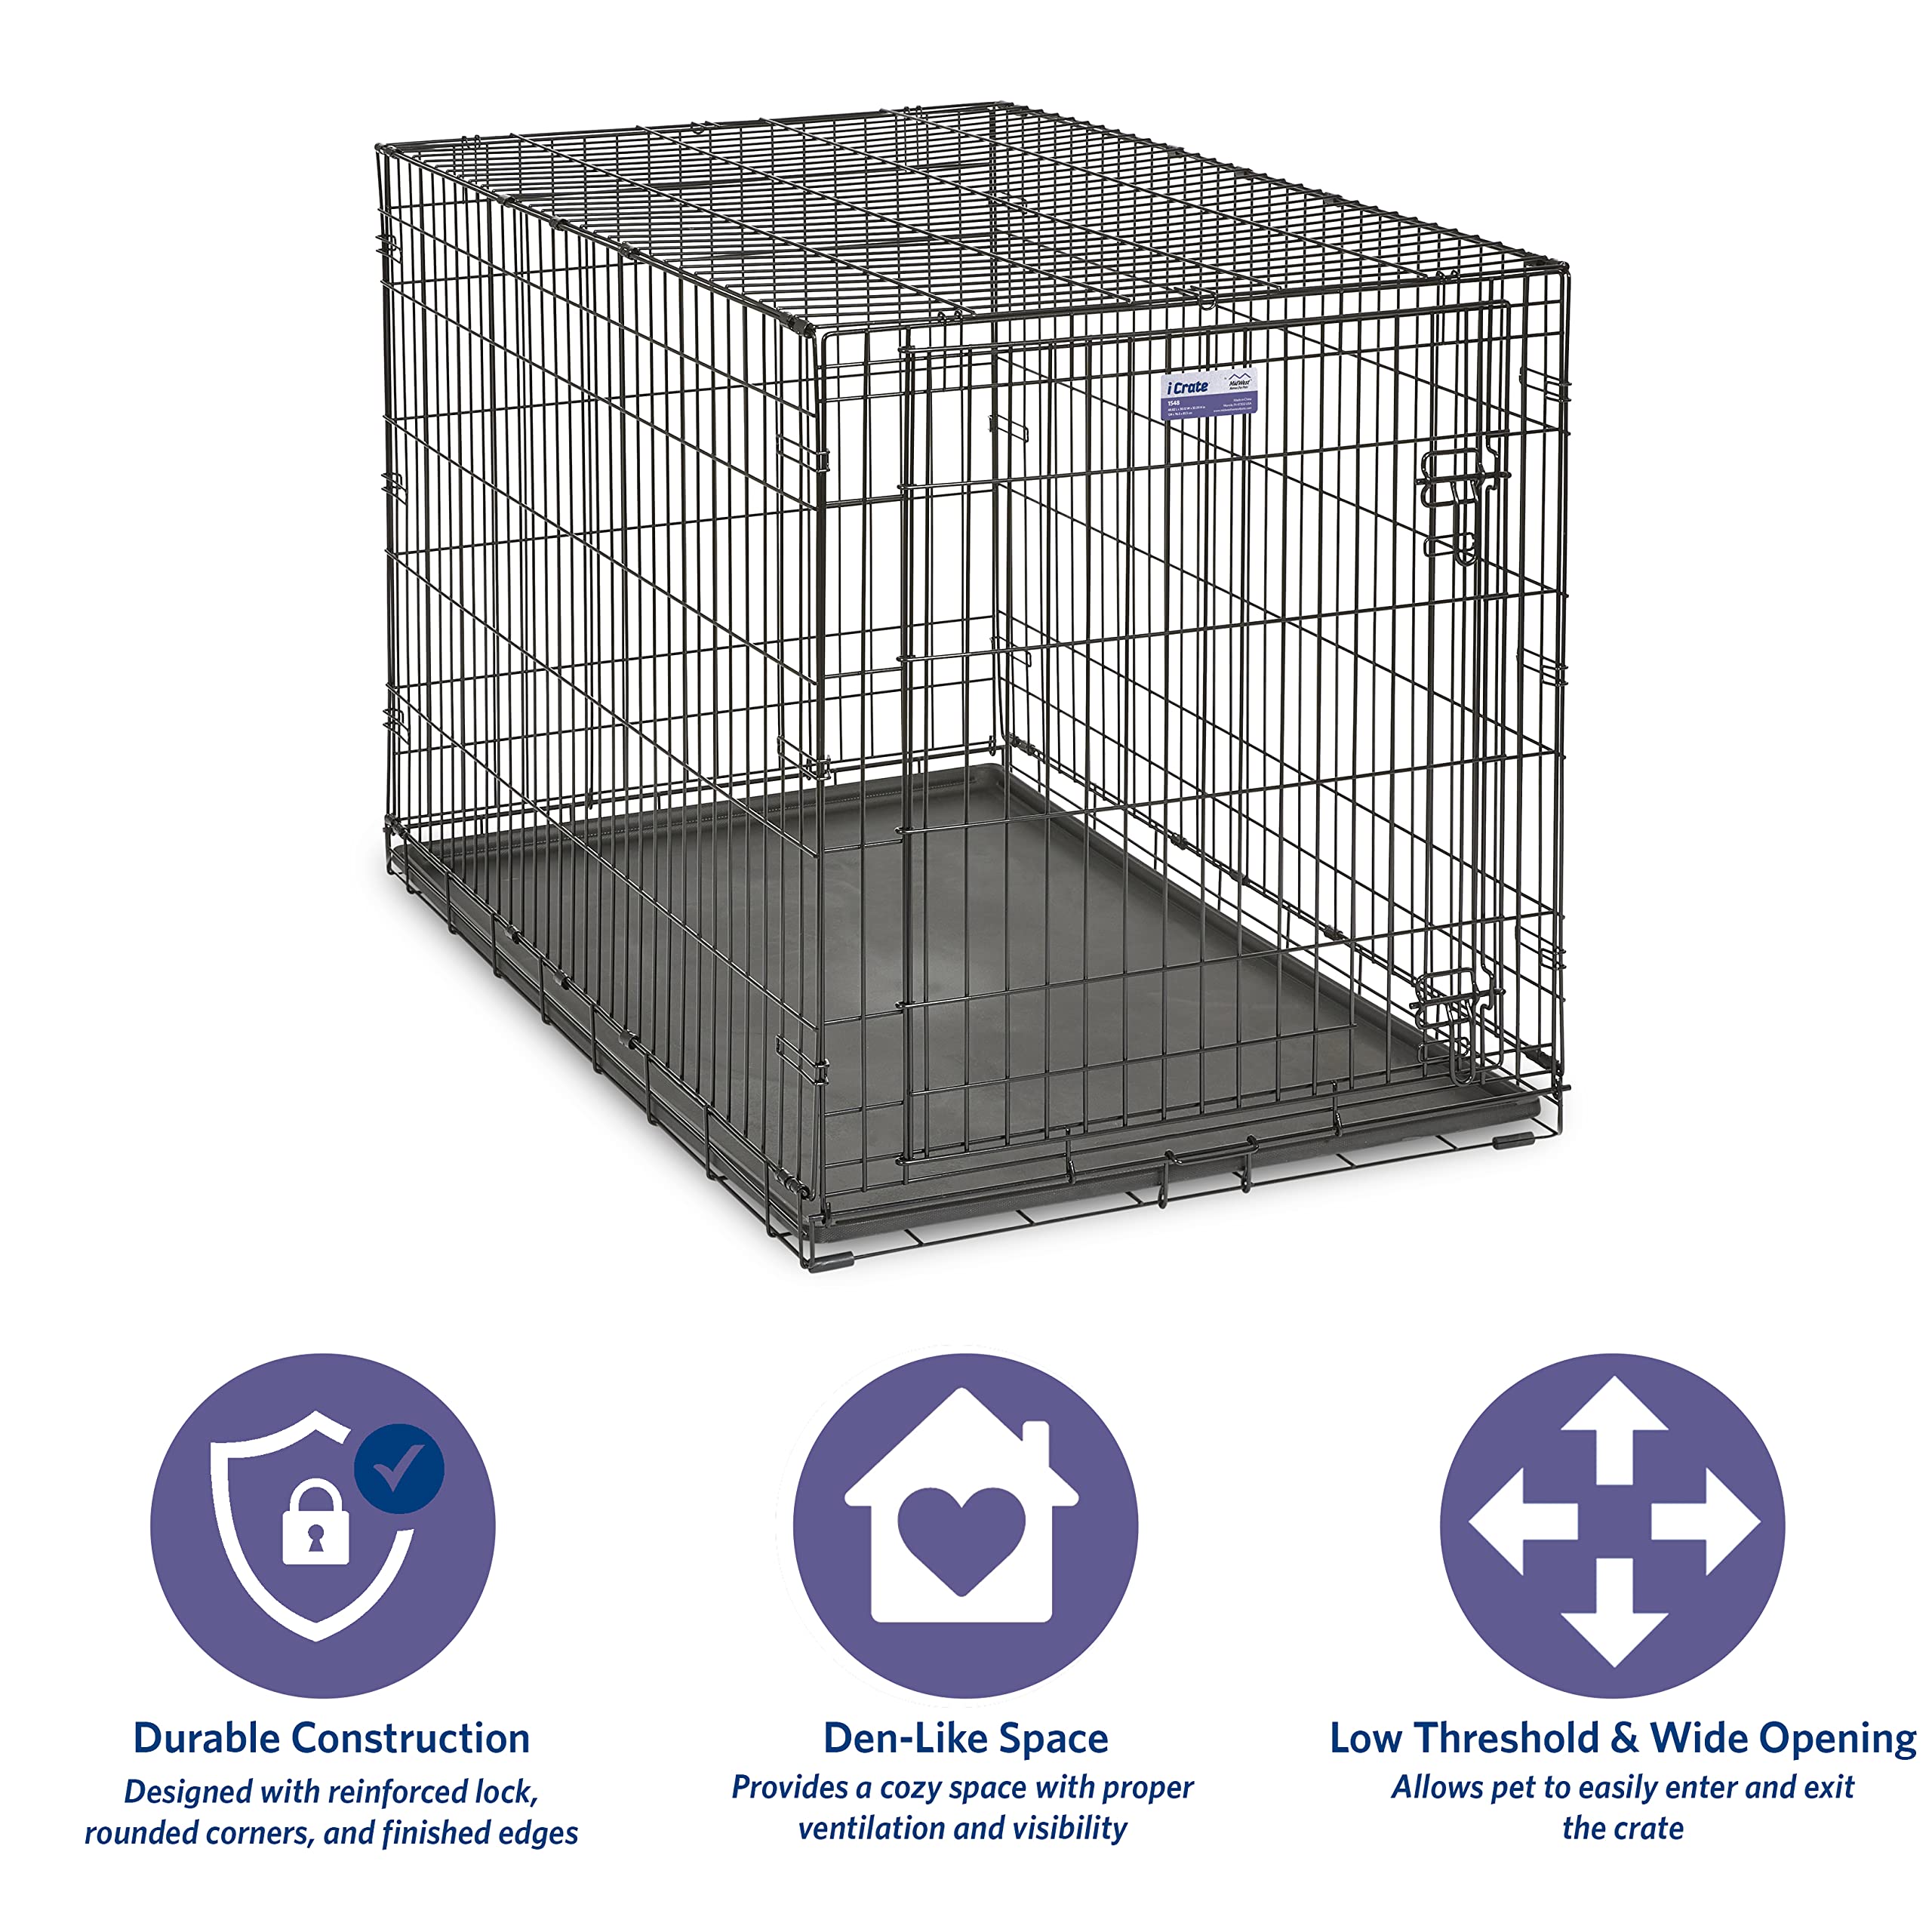 MidWest Homes for Pets Newly Enhanced Single Door icrate Dog crate, Includes Leak-Proof Pan, Floor Protecting Feet, Divider Pane